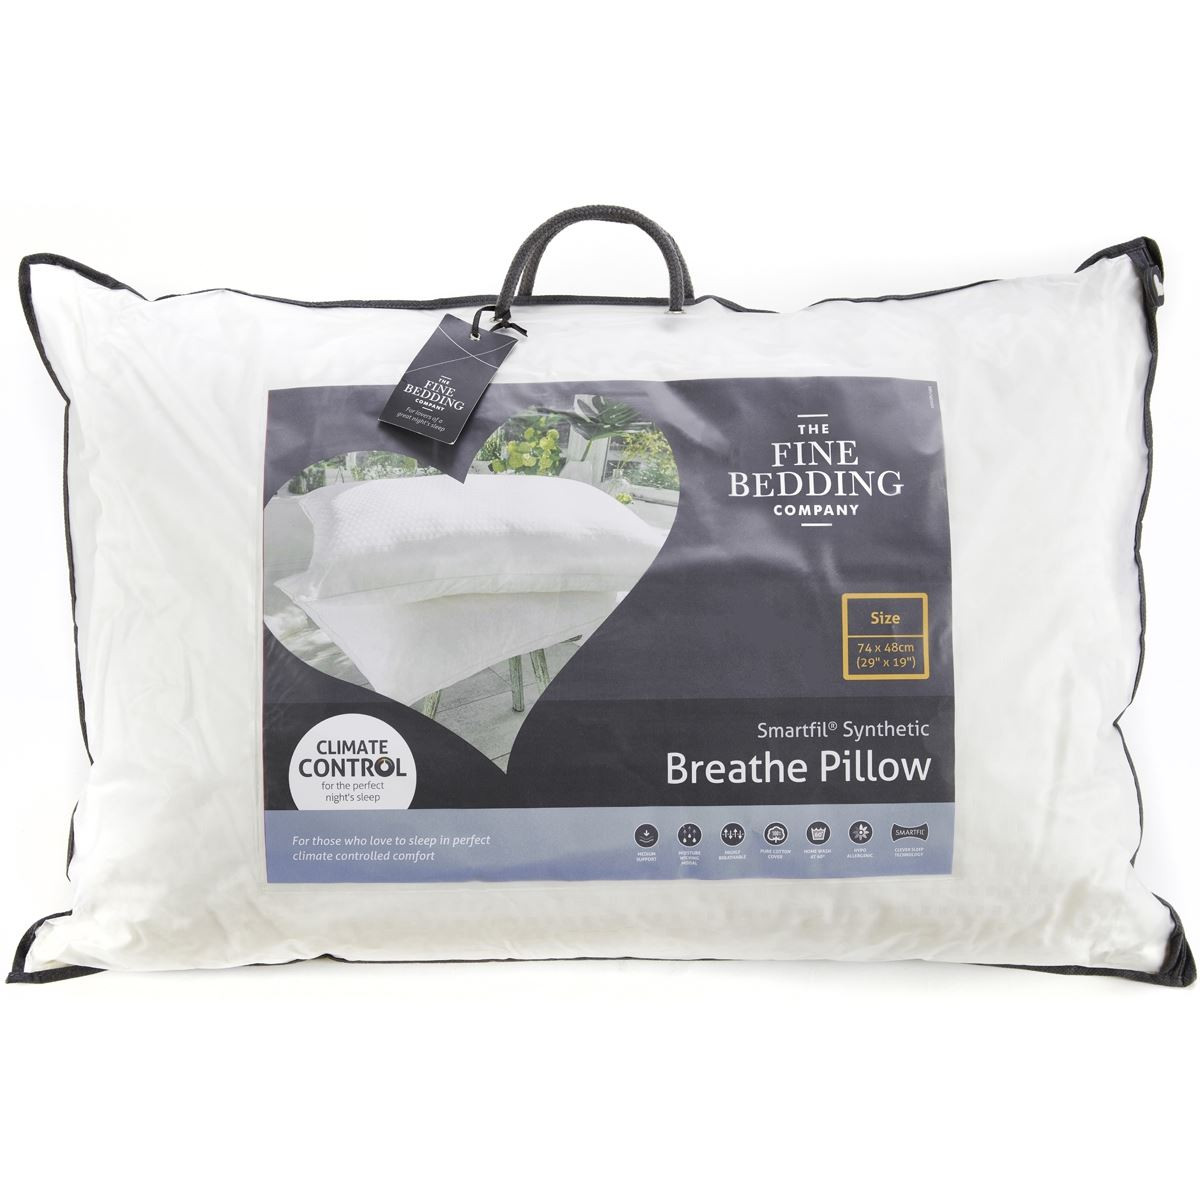 Image of The Fine Bedding Company Breathe Pillow